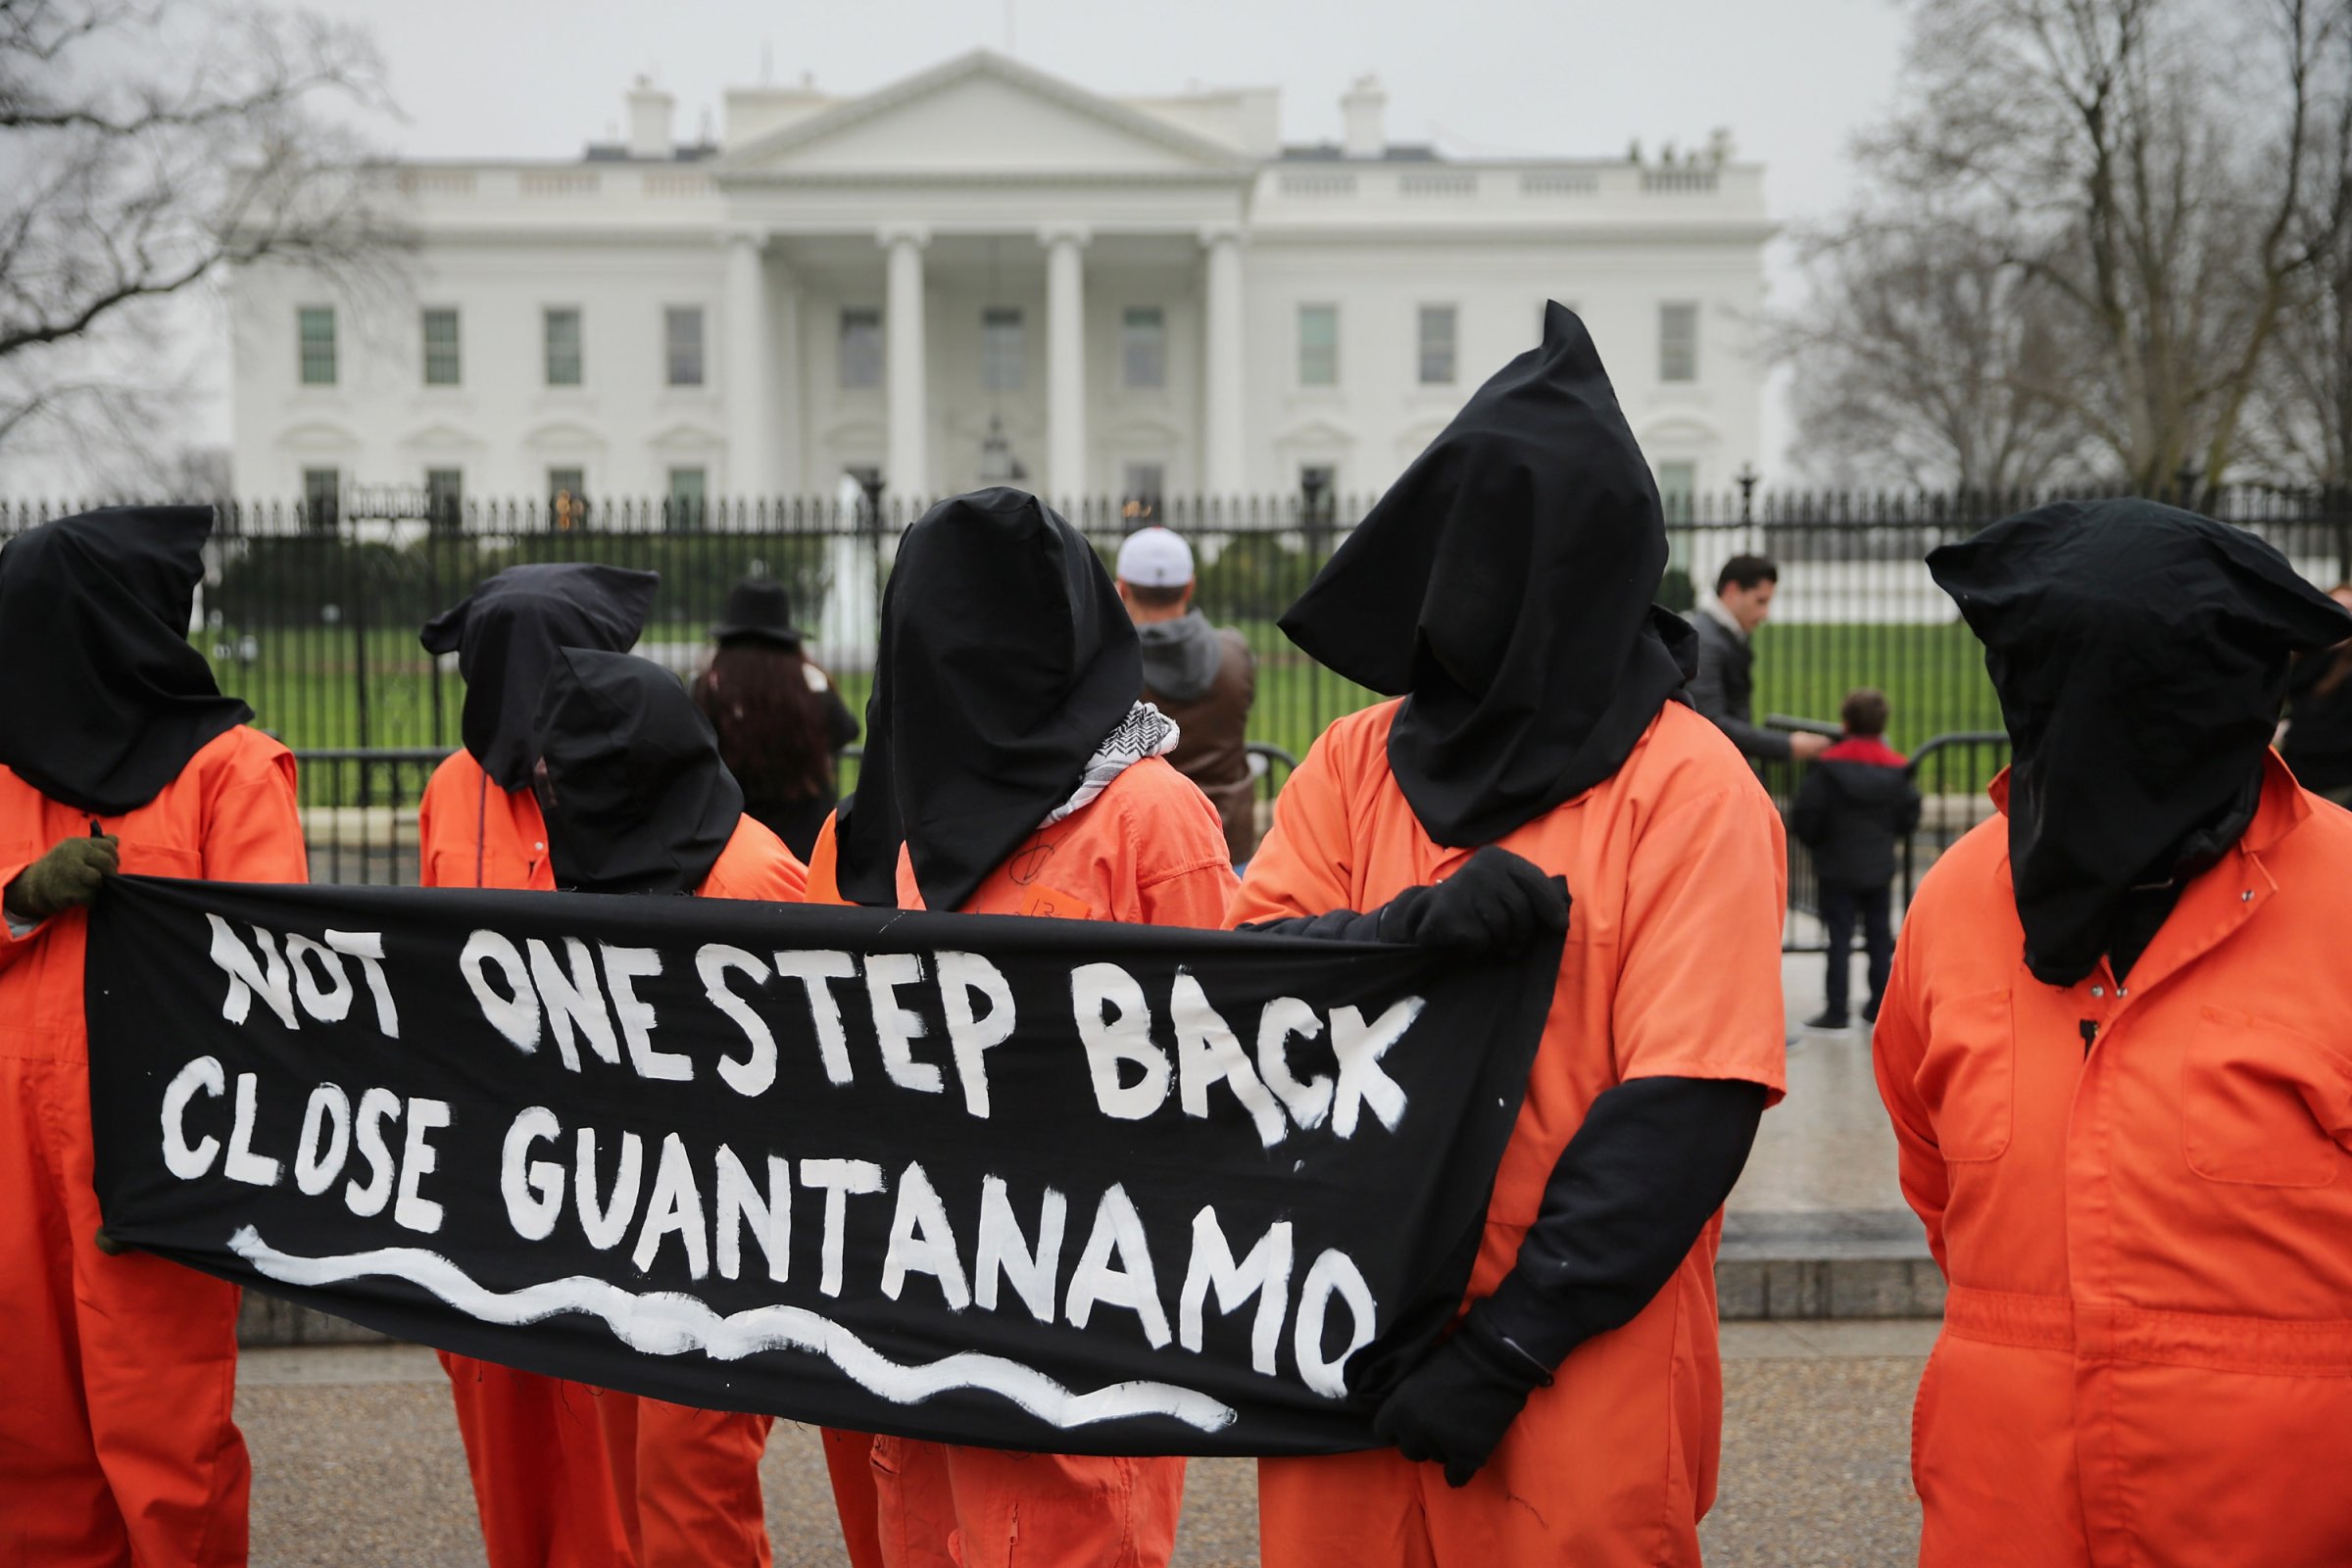 Demonstrators with the group Witness Against Torture dress in orange jumpsuits and wear black hoods while demanding that U.S. President Barack Obama close the military prison in Guantanamo, Cuba, outside the White House in Washington, DC.. on Jan. 8, 2016.